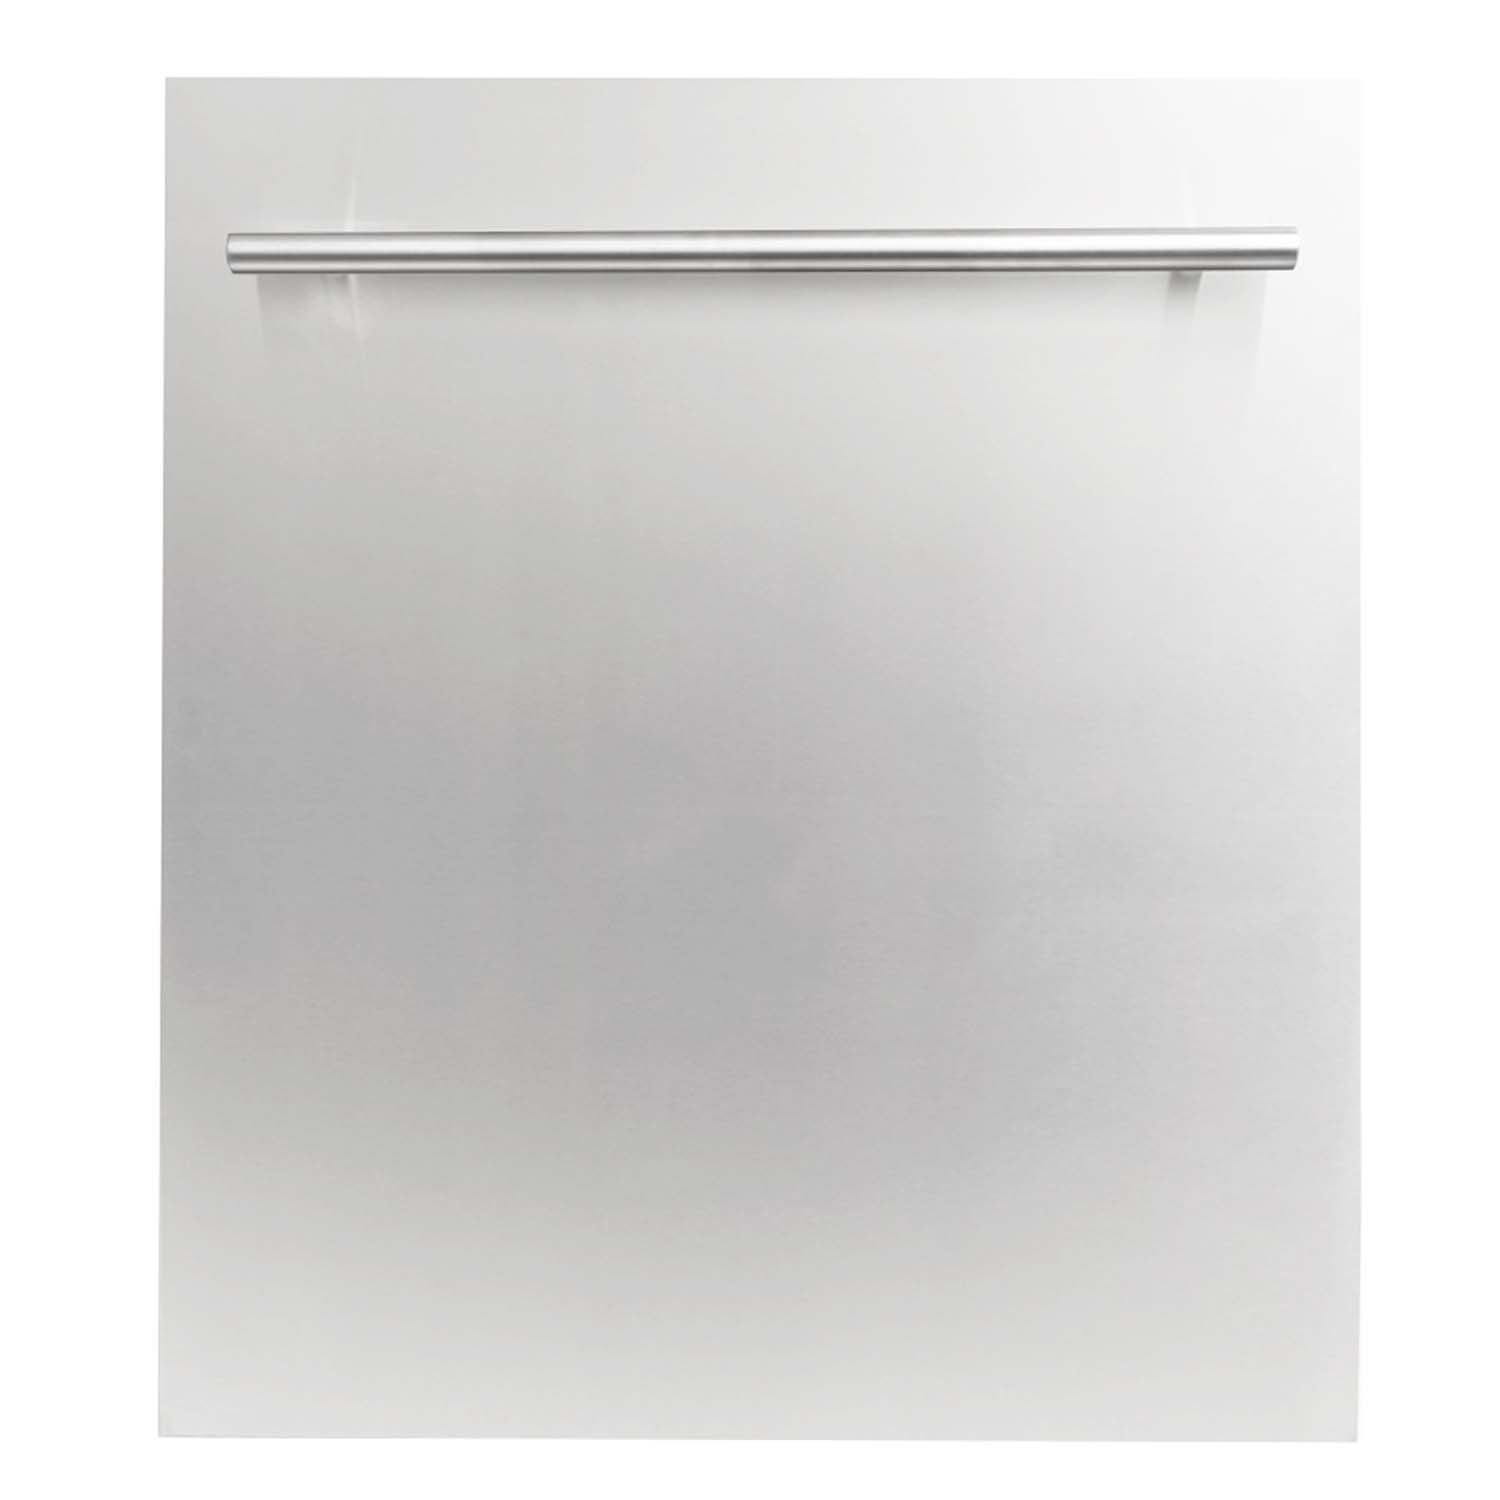 ZLINE 24" dishwasher with stainless steel panel front.